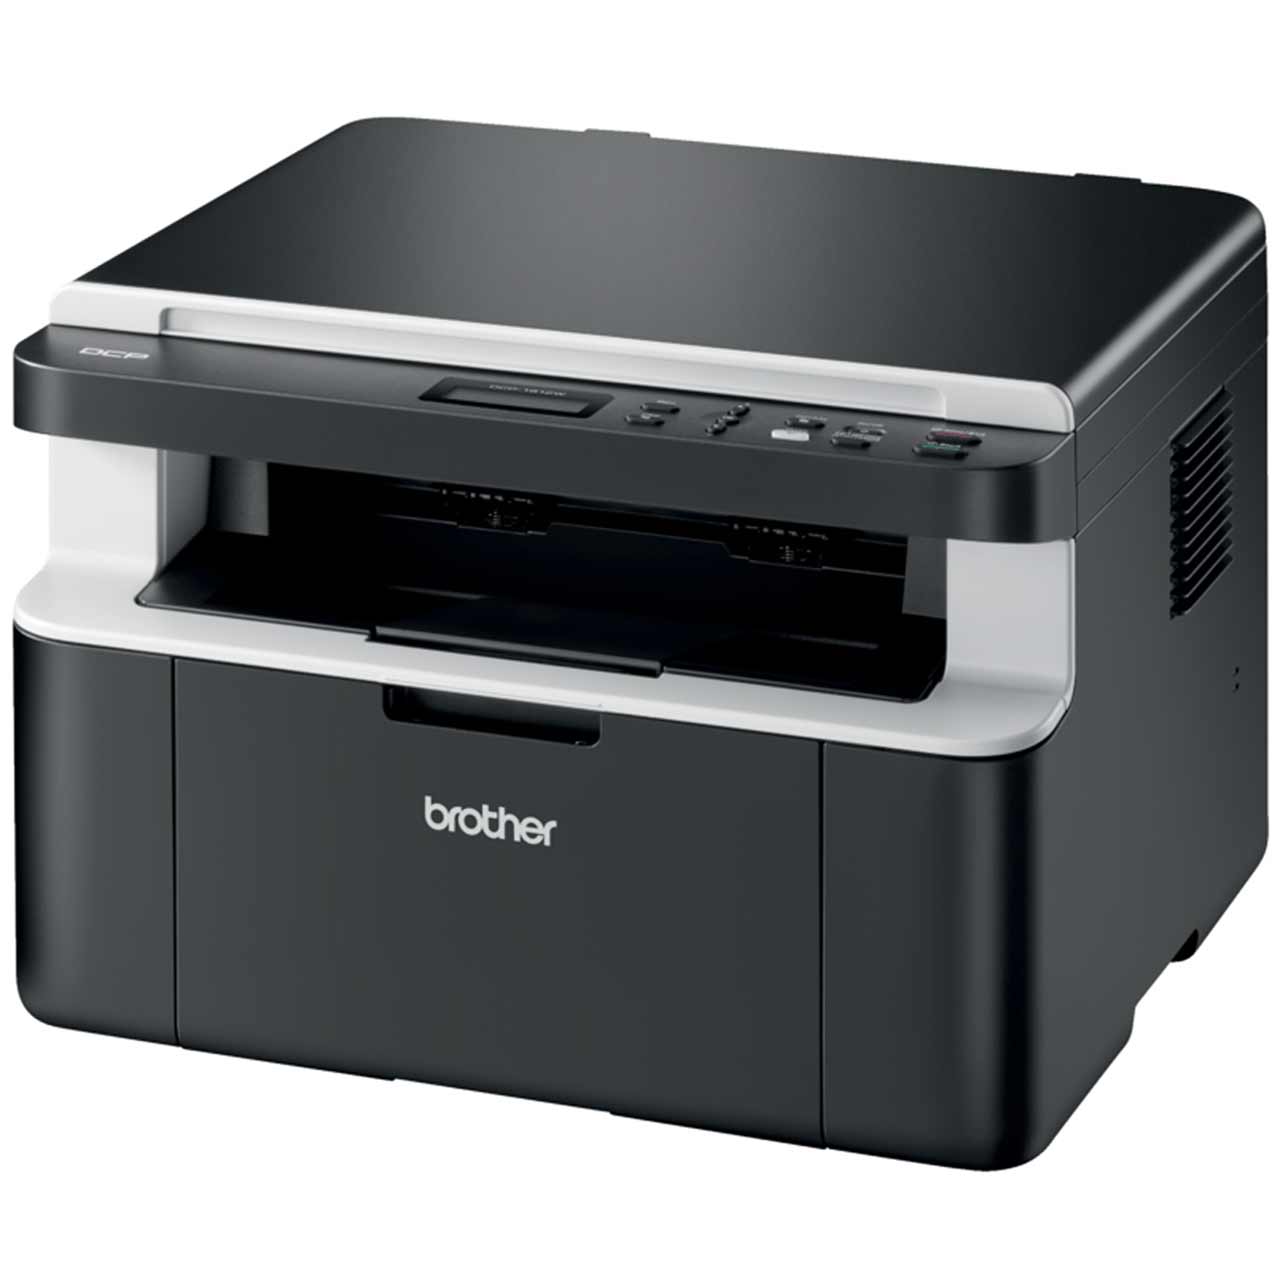 Brother DCP-1612W Compact All-In-One Wireless Mono Laser Printer - Black, Black